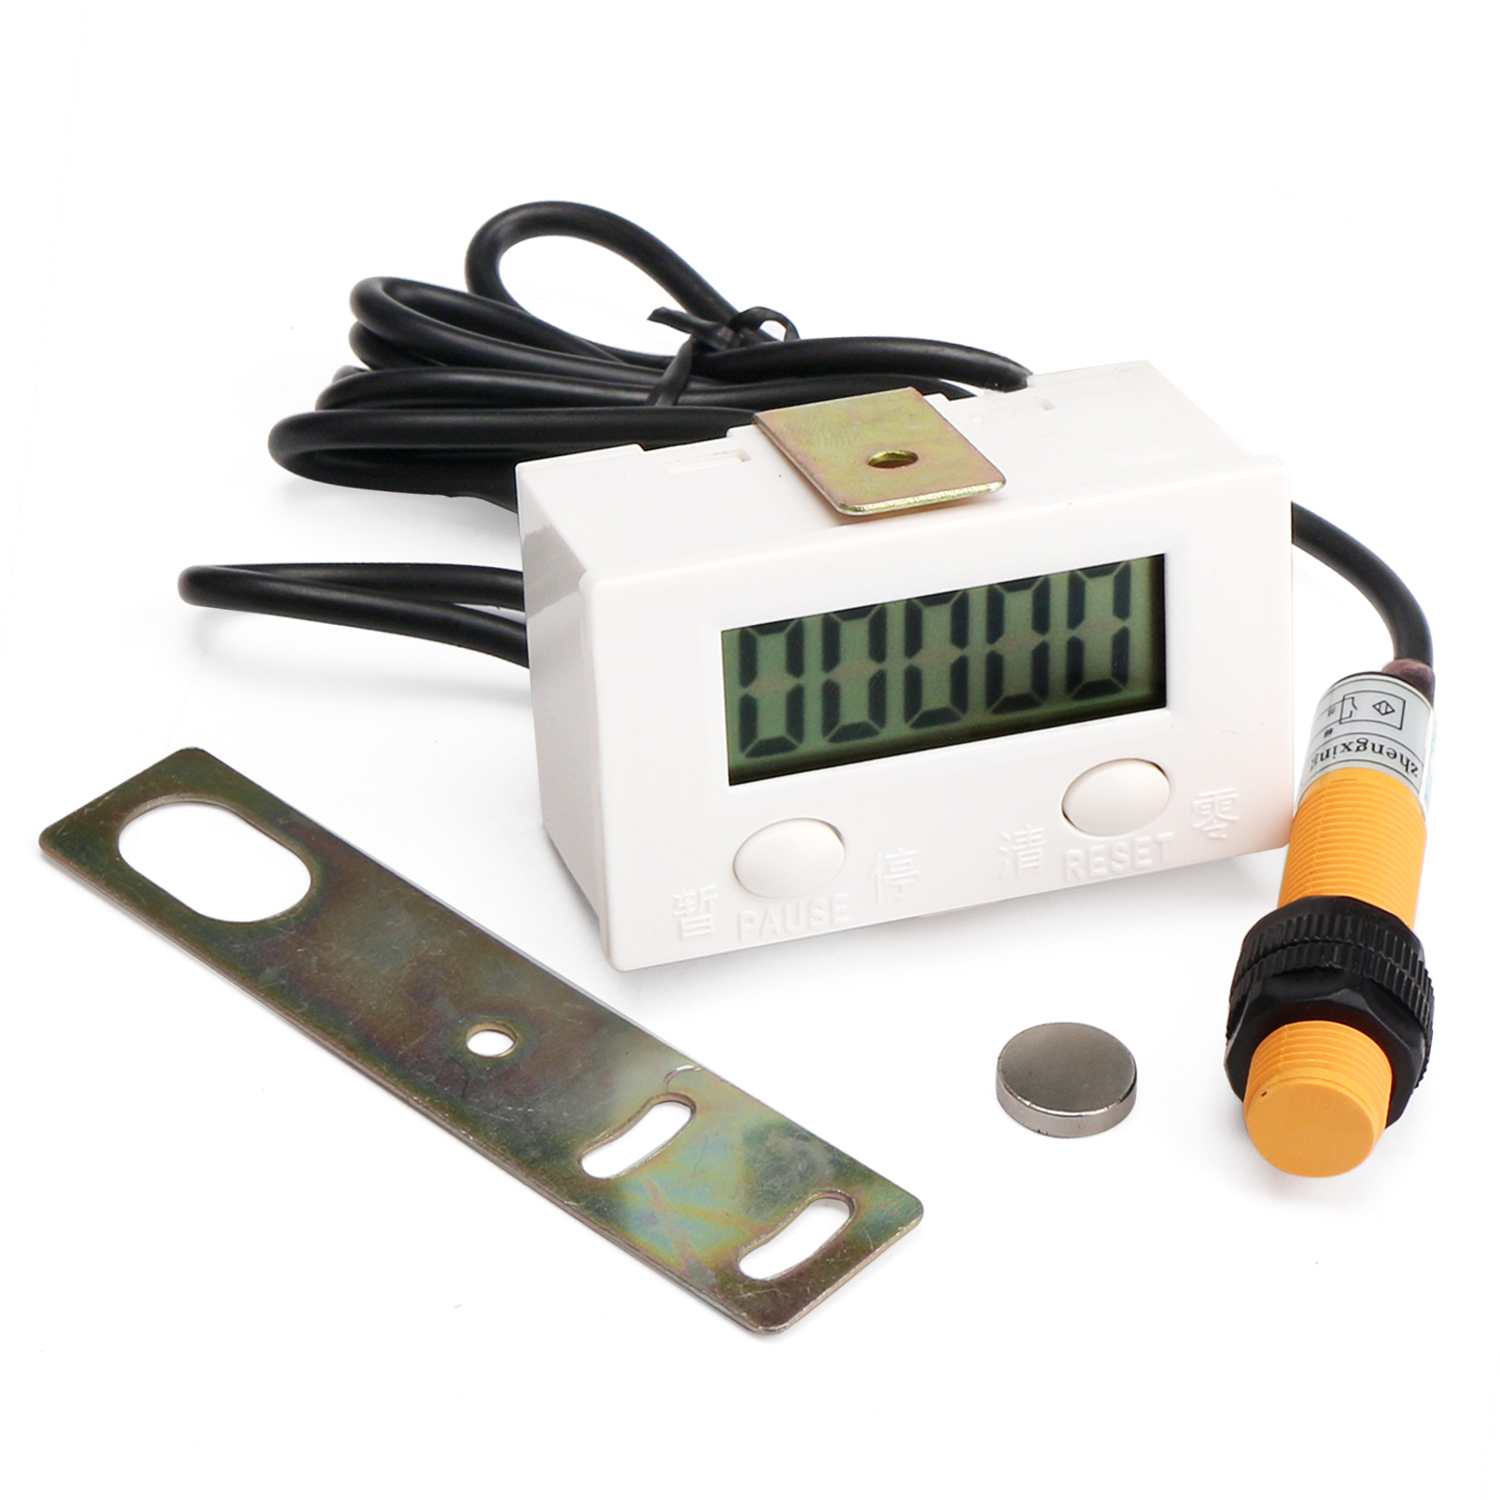 Digital Electronic Counter Punch Magnetic Induction Proximity Switch 5-digital 